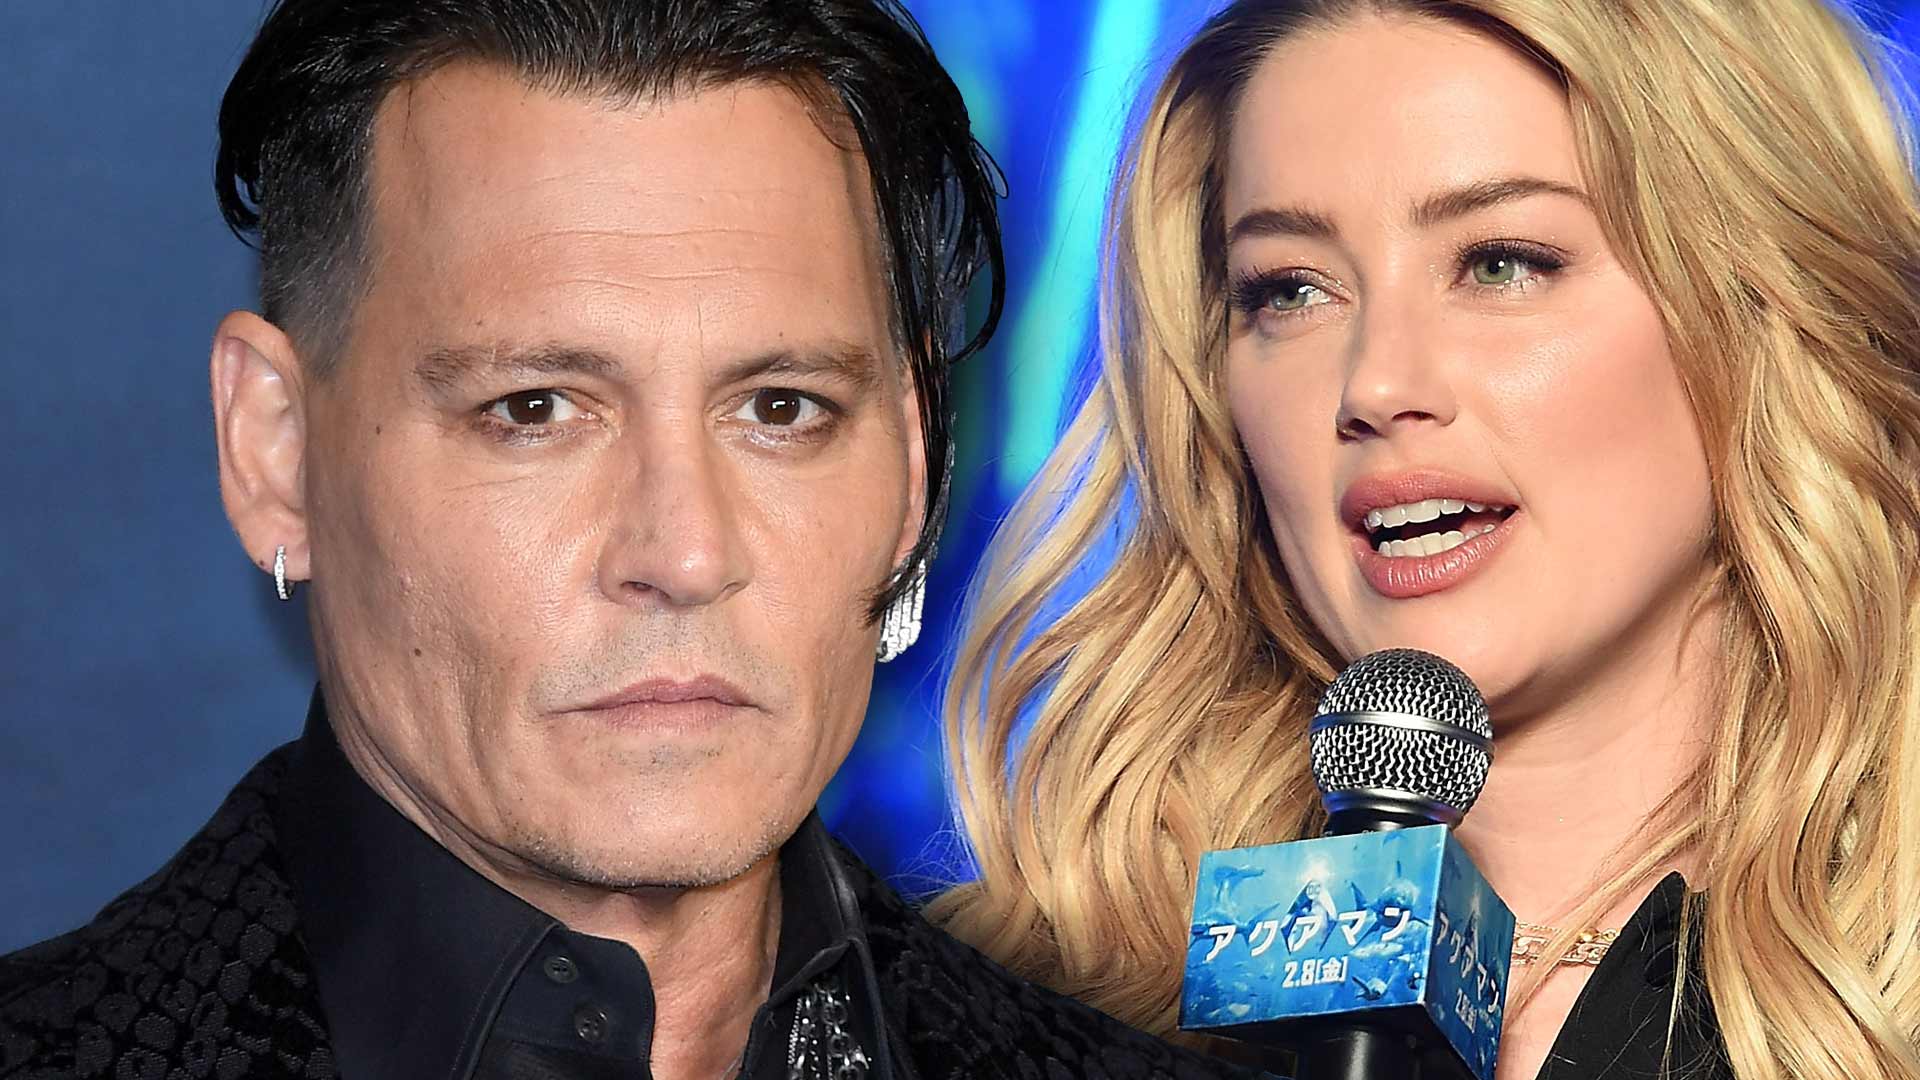 Lawsuit Filed Against Amber Heard By Johnny Depp For Defamation for $50 Million